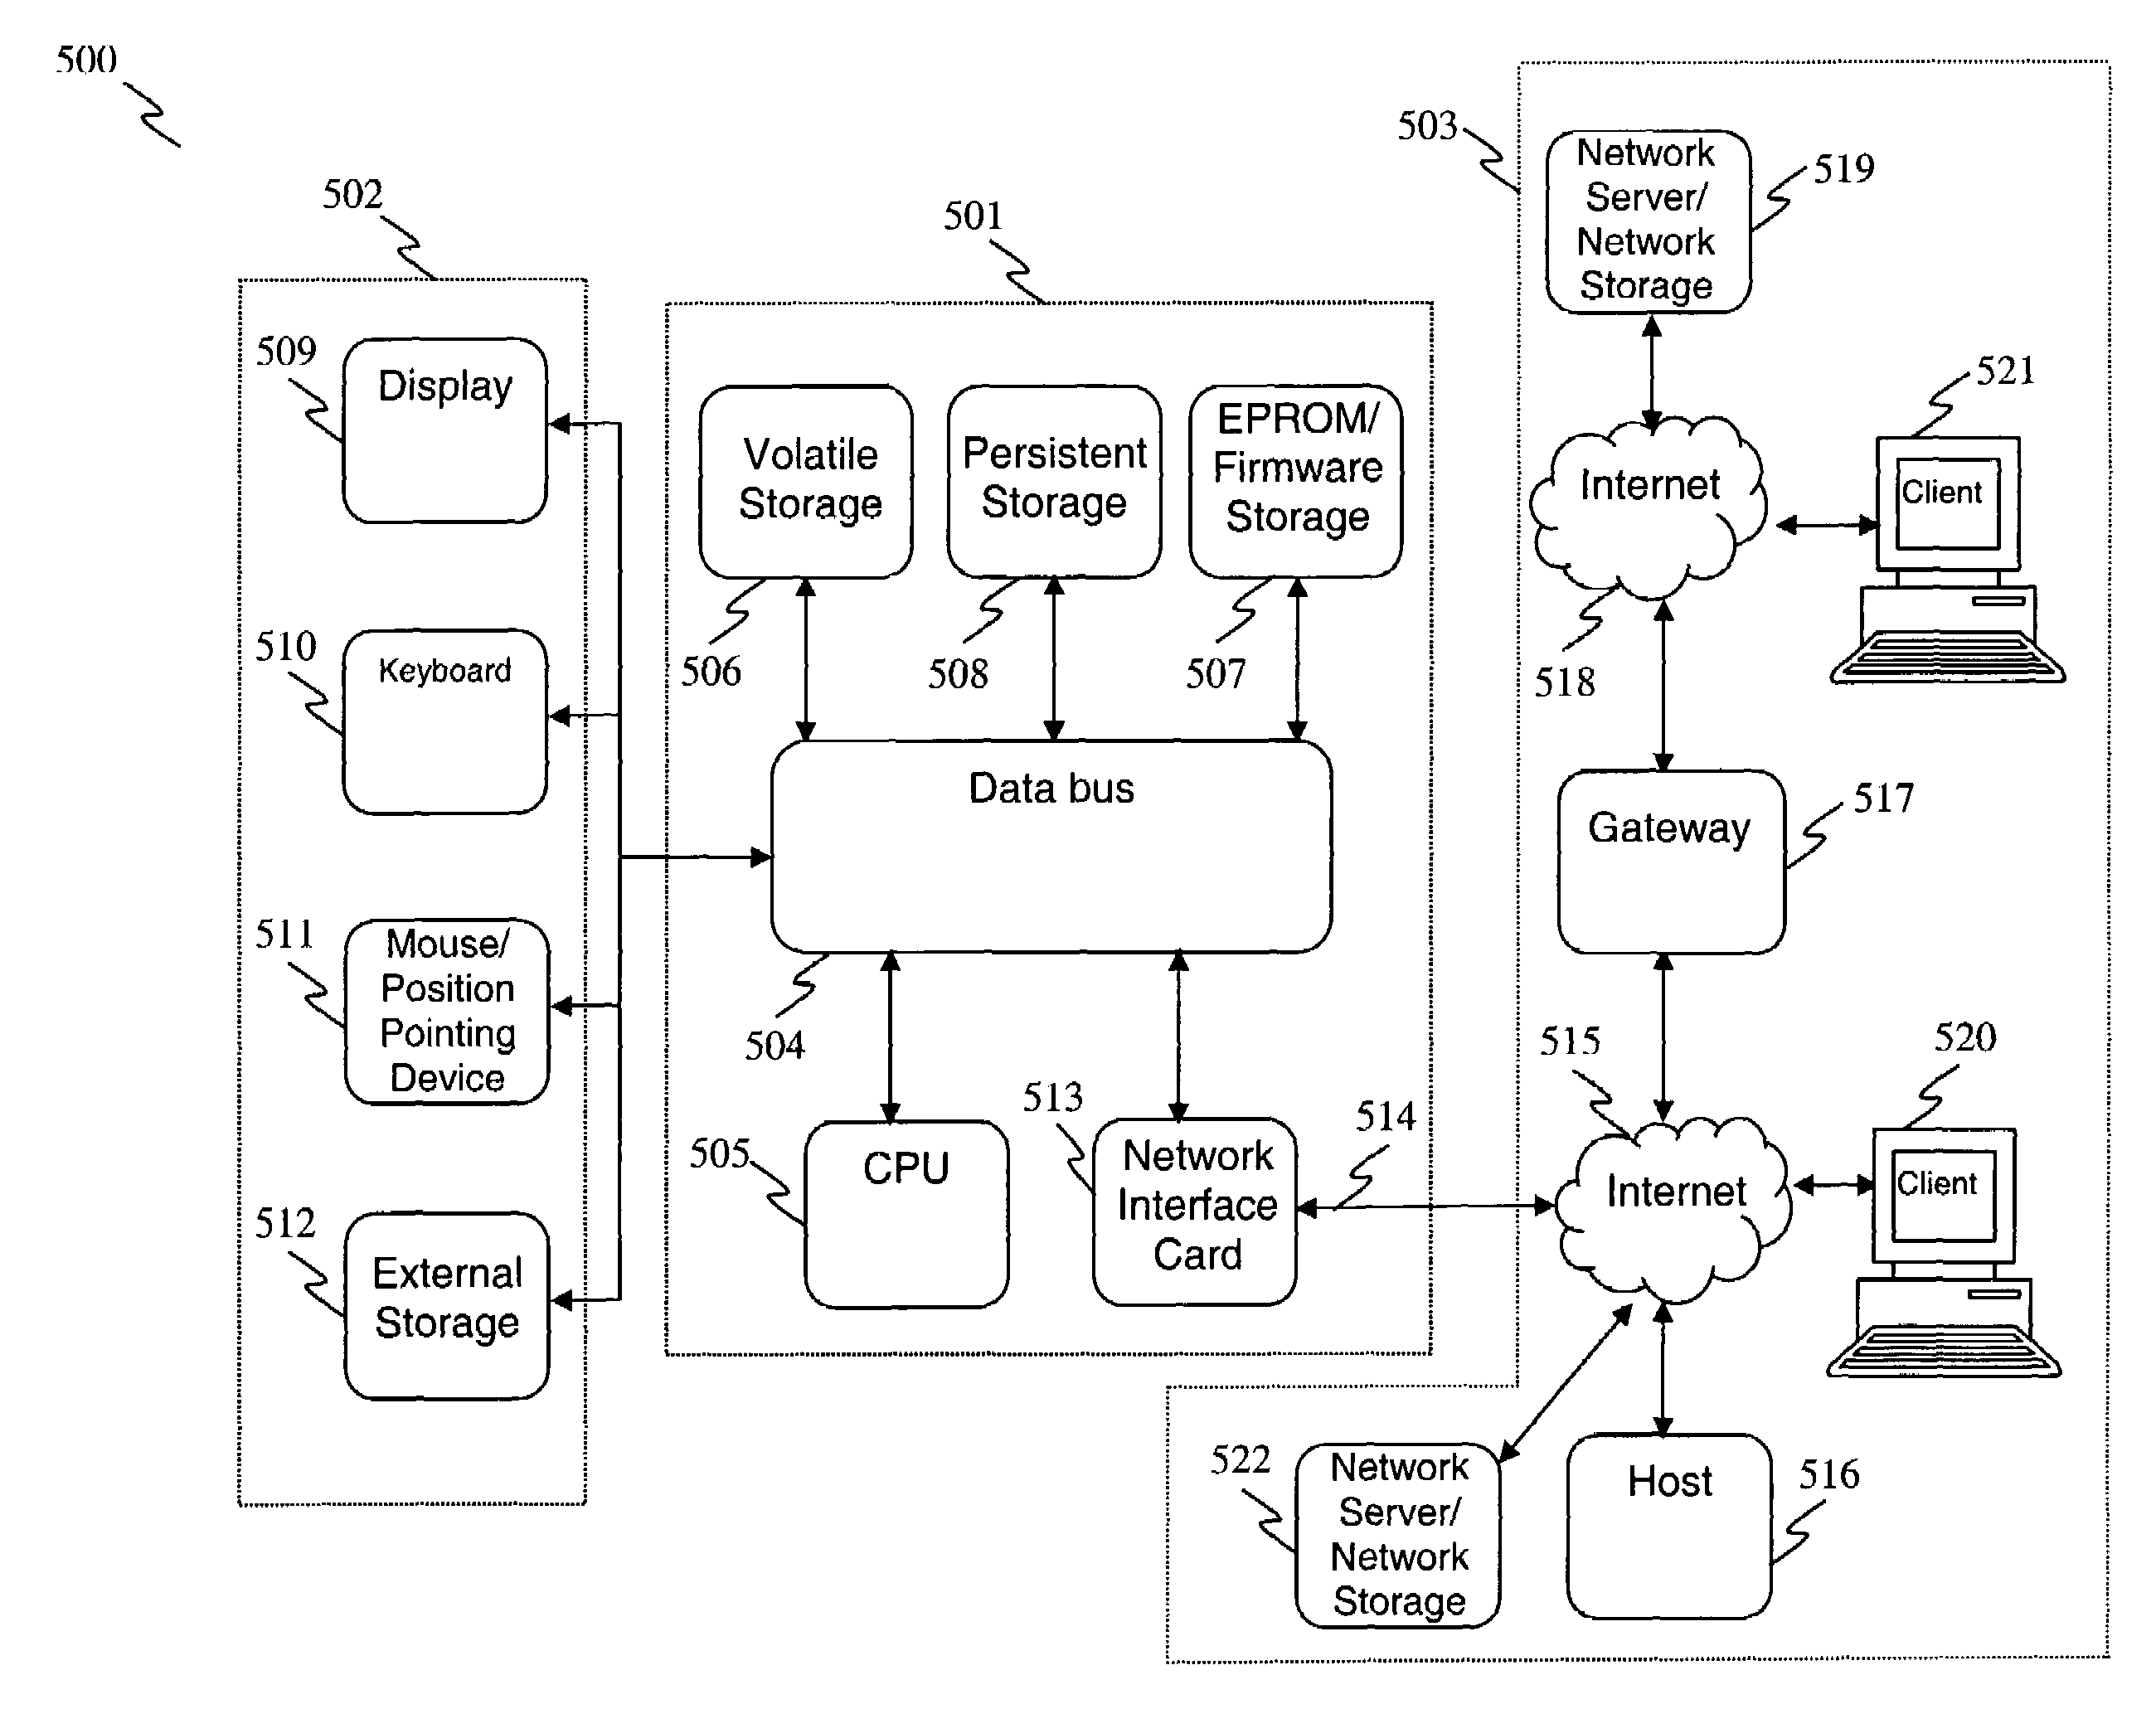 Apparatus and method for term context modeling for information retrieval